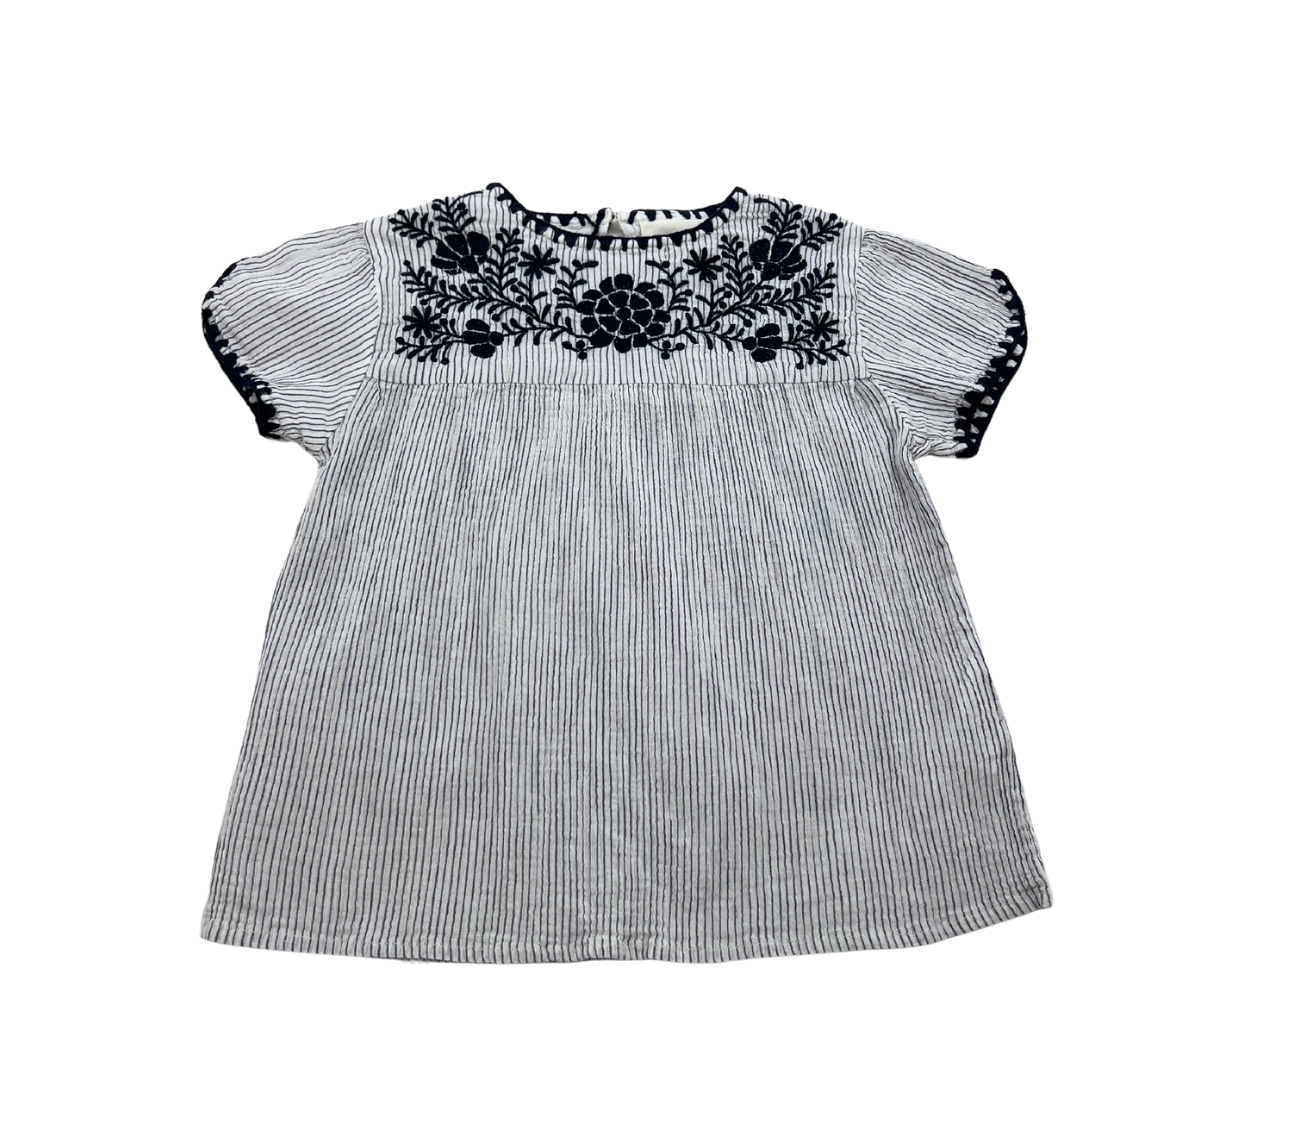 LOUIS LOUISE - Striped blouse - 4 years old